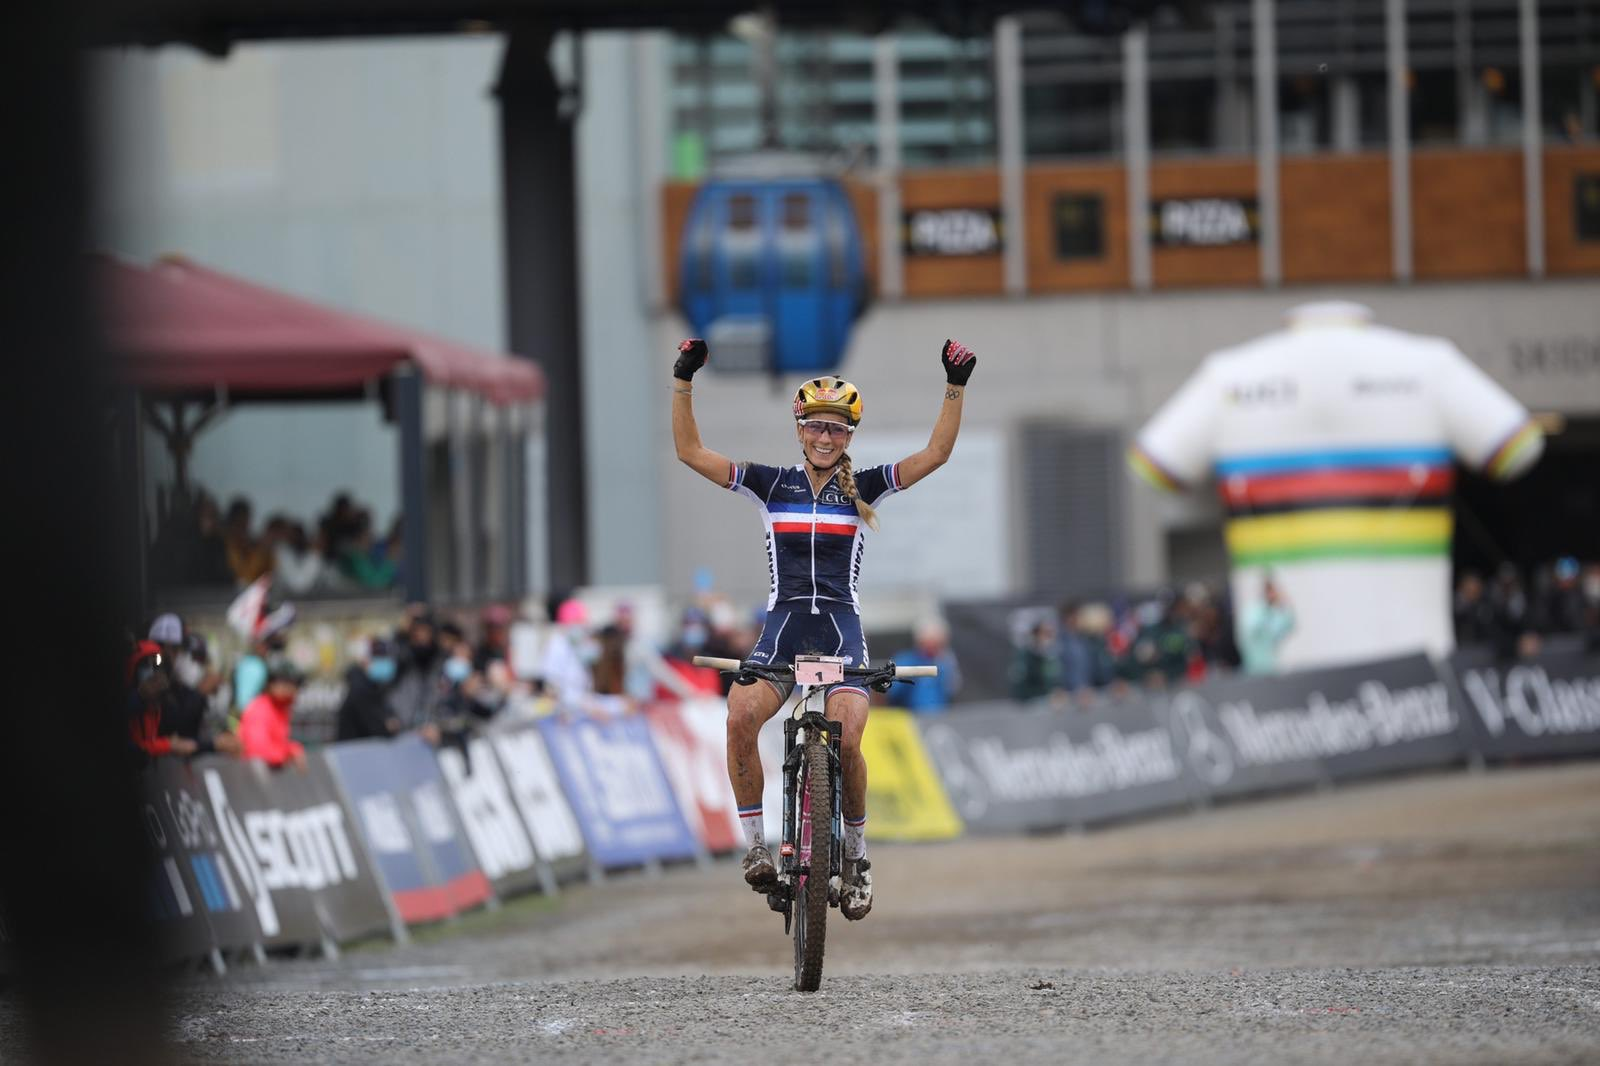 French cyclist Pauline Ferrand-Prévot, winner of three mountain biking world titles this year, is targeting gold at the Paris 2024 Olympics ©Getty Images